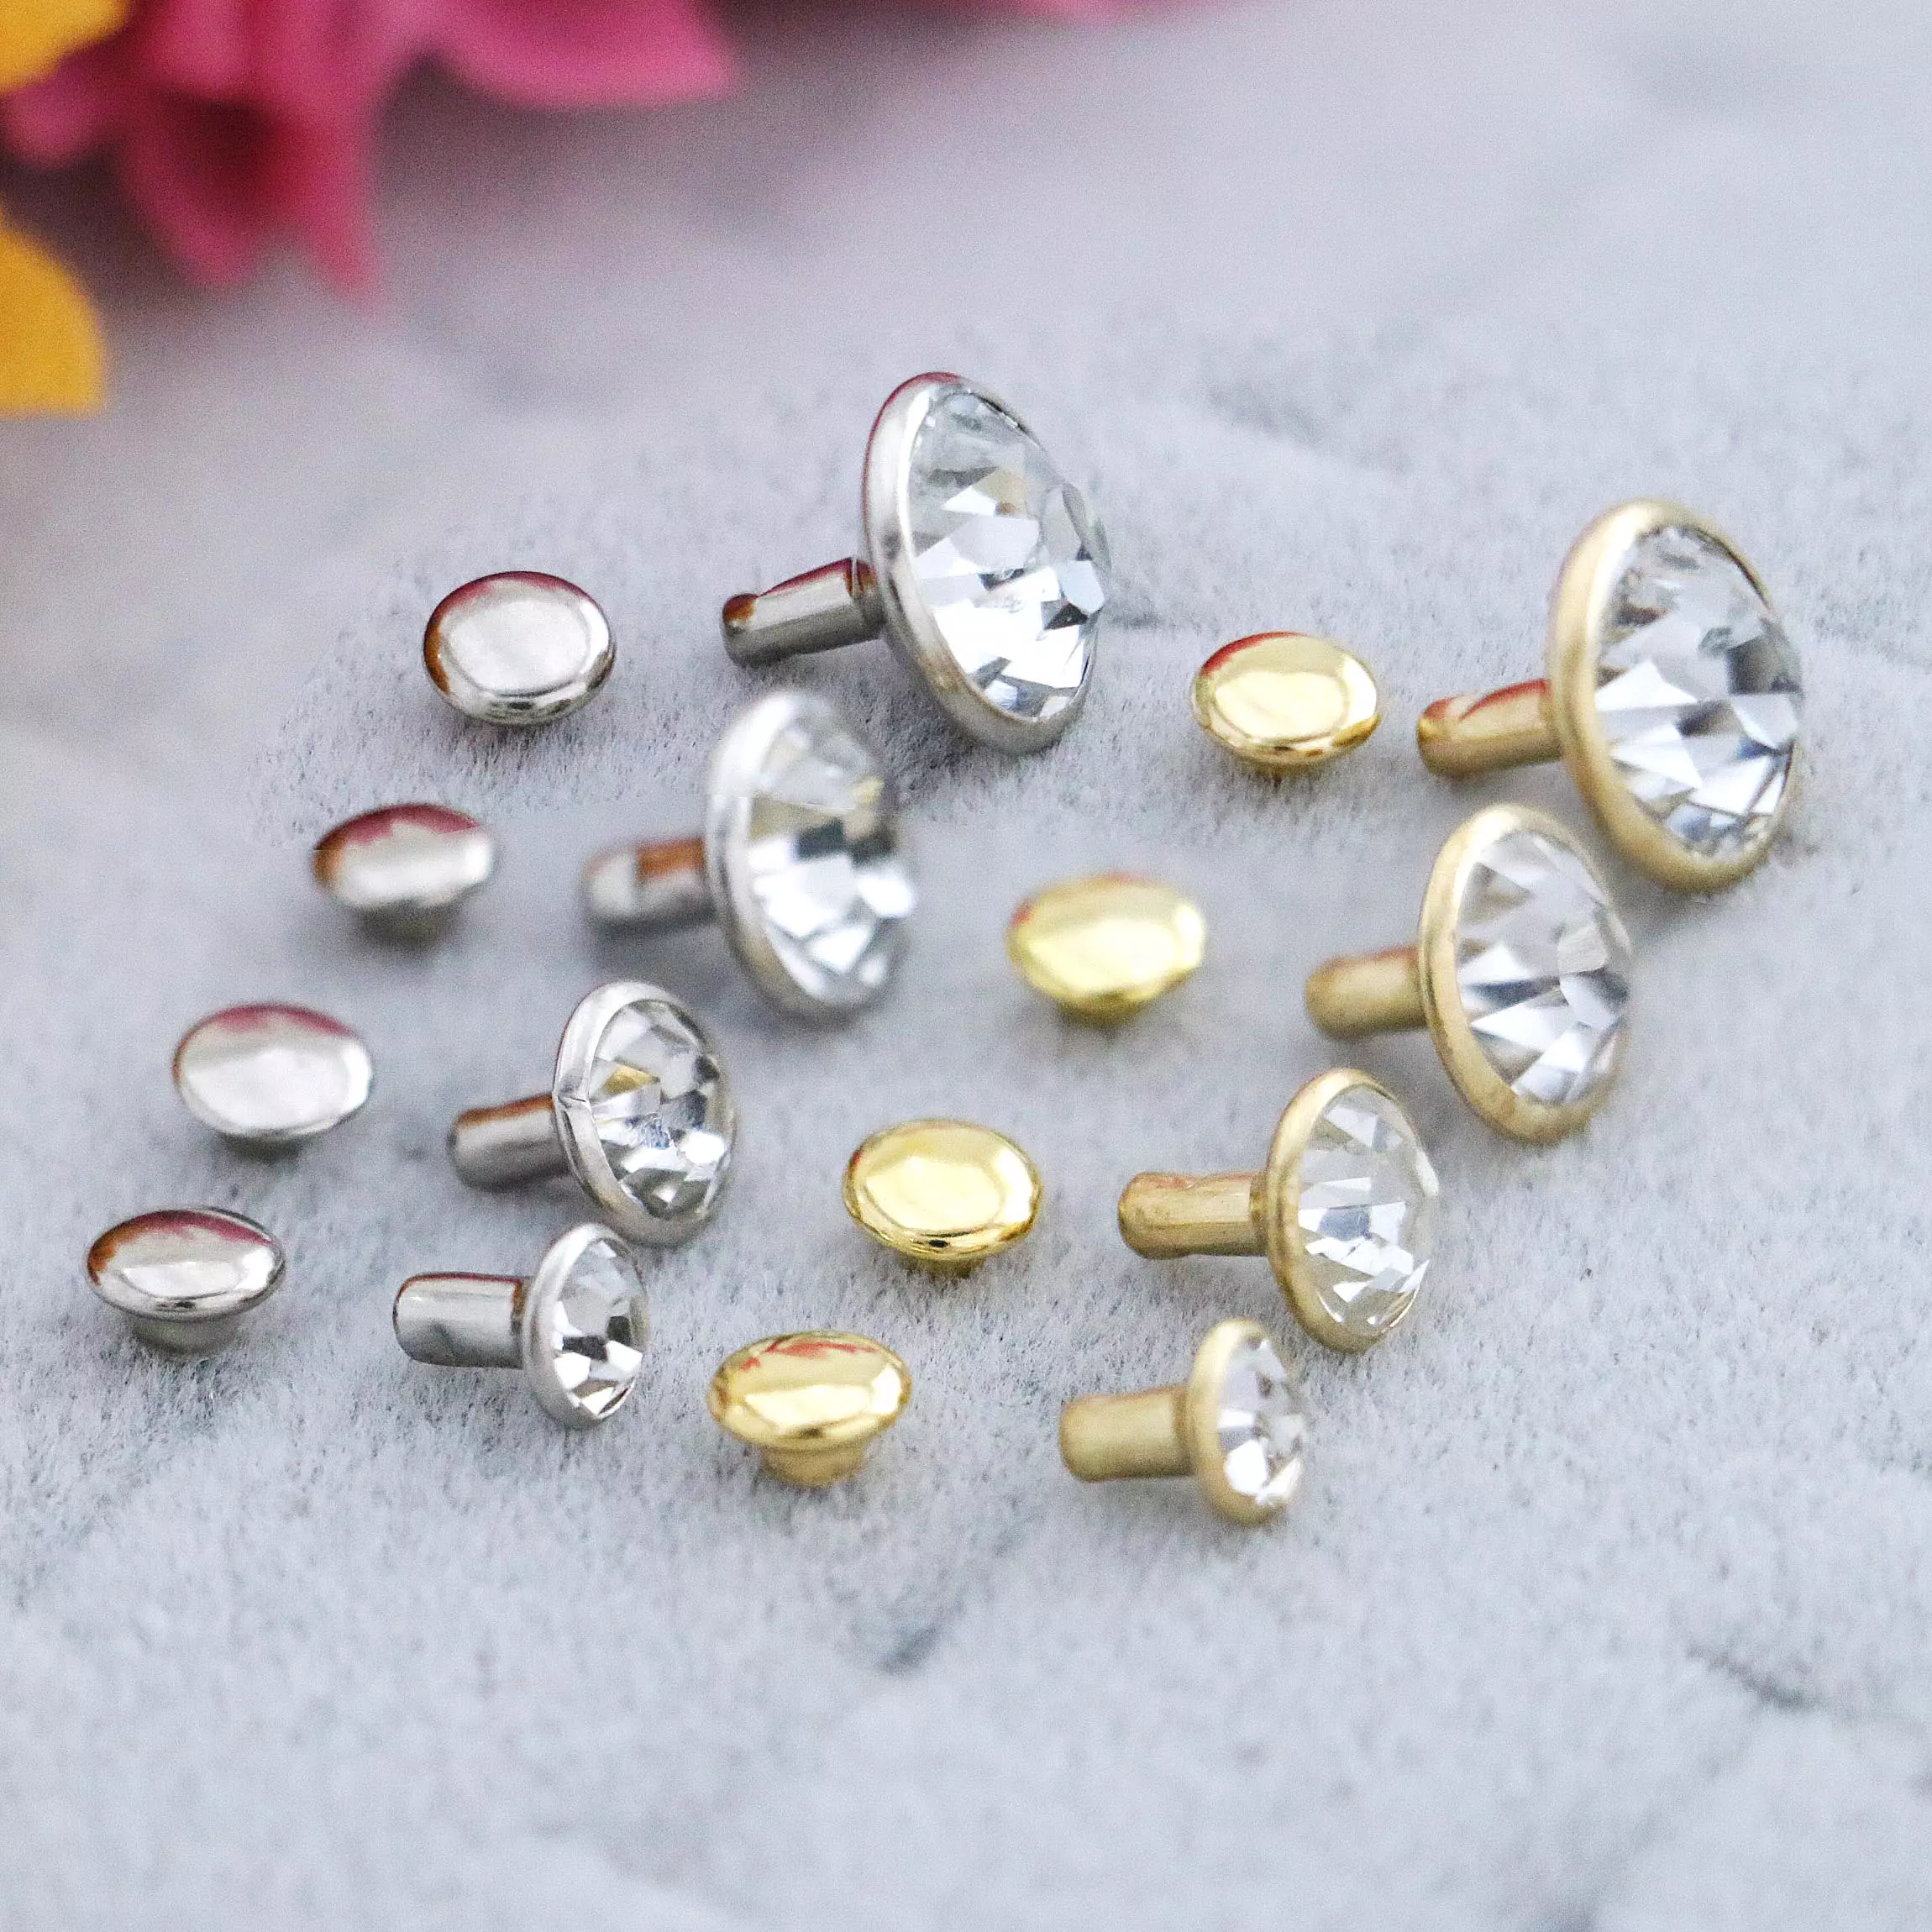 50 Full Sets Crystal Rhinestone Rivetssilver/gold Finished7 Sizes  Availablesnap Rivets Presse Pour Rivet Rivets for Leather Crafting 